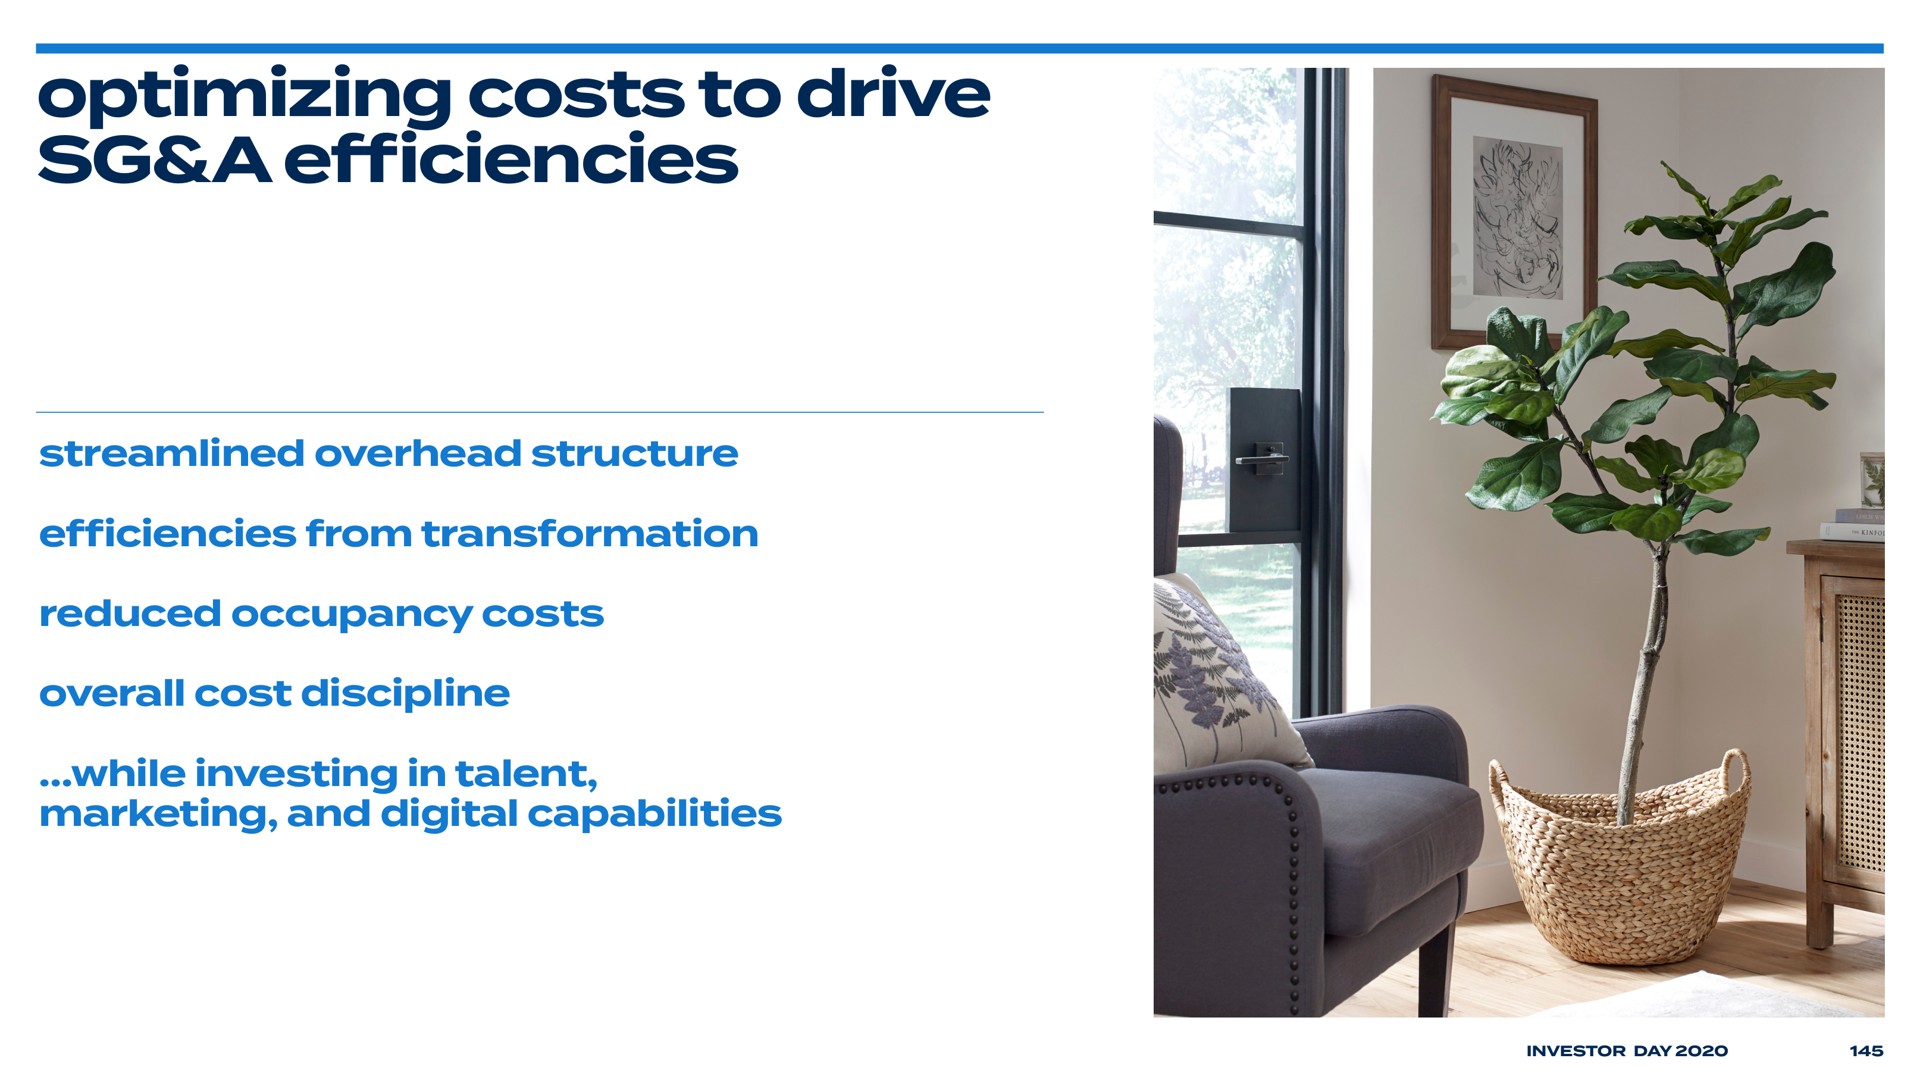 optimizing costs to drive a efficiencies | Bed Bath & Beyond